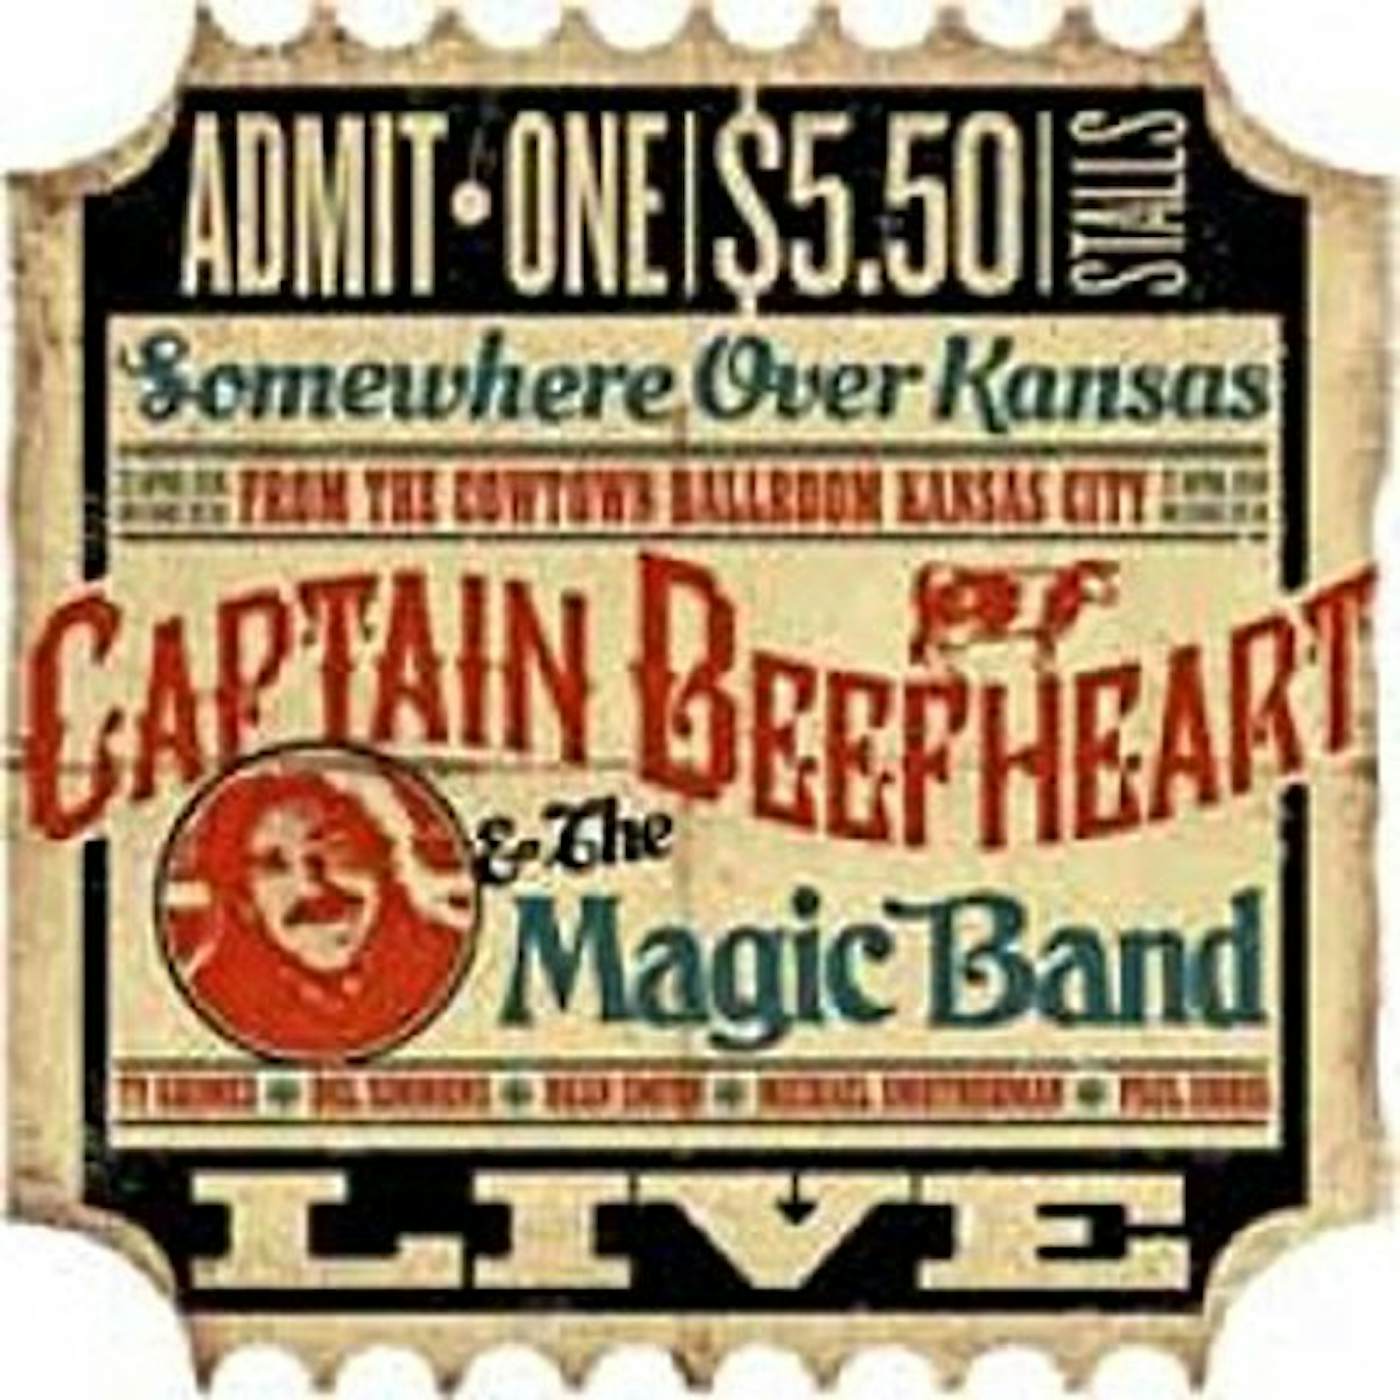 Captain Beefheart & His Magic Band LIVE IN COWTOWN KANSAS CITY 22ND APRIL 1974 CD